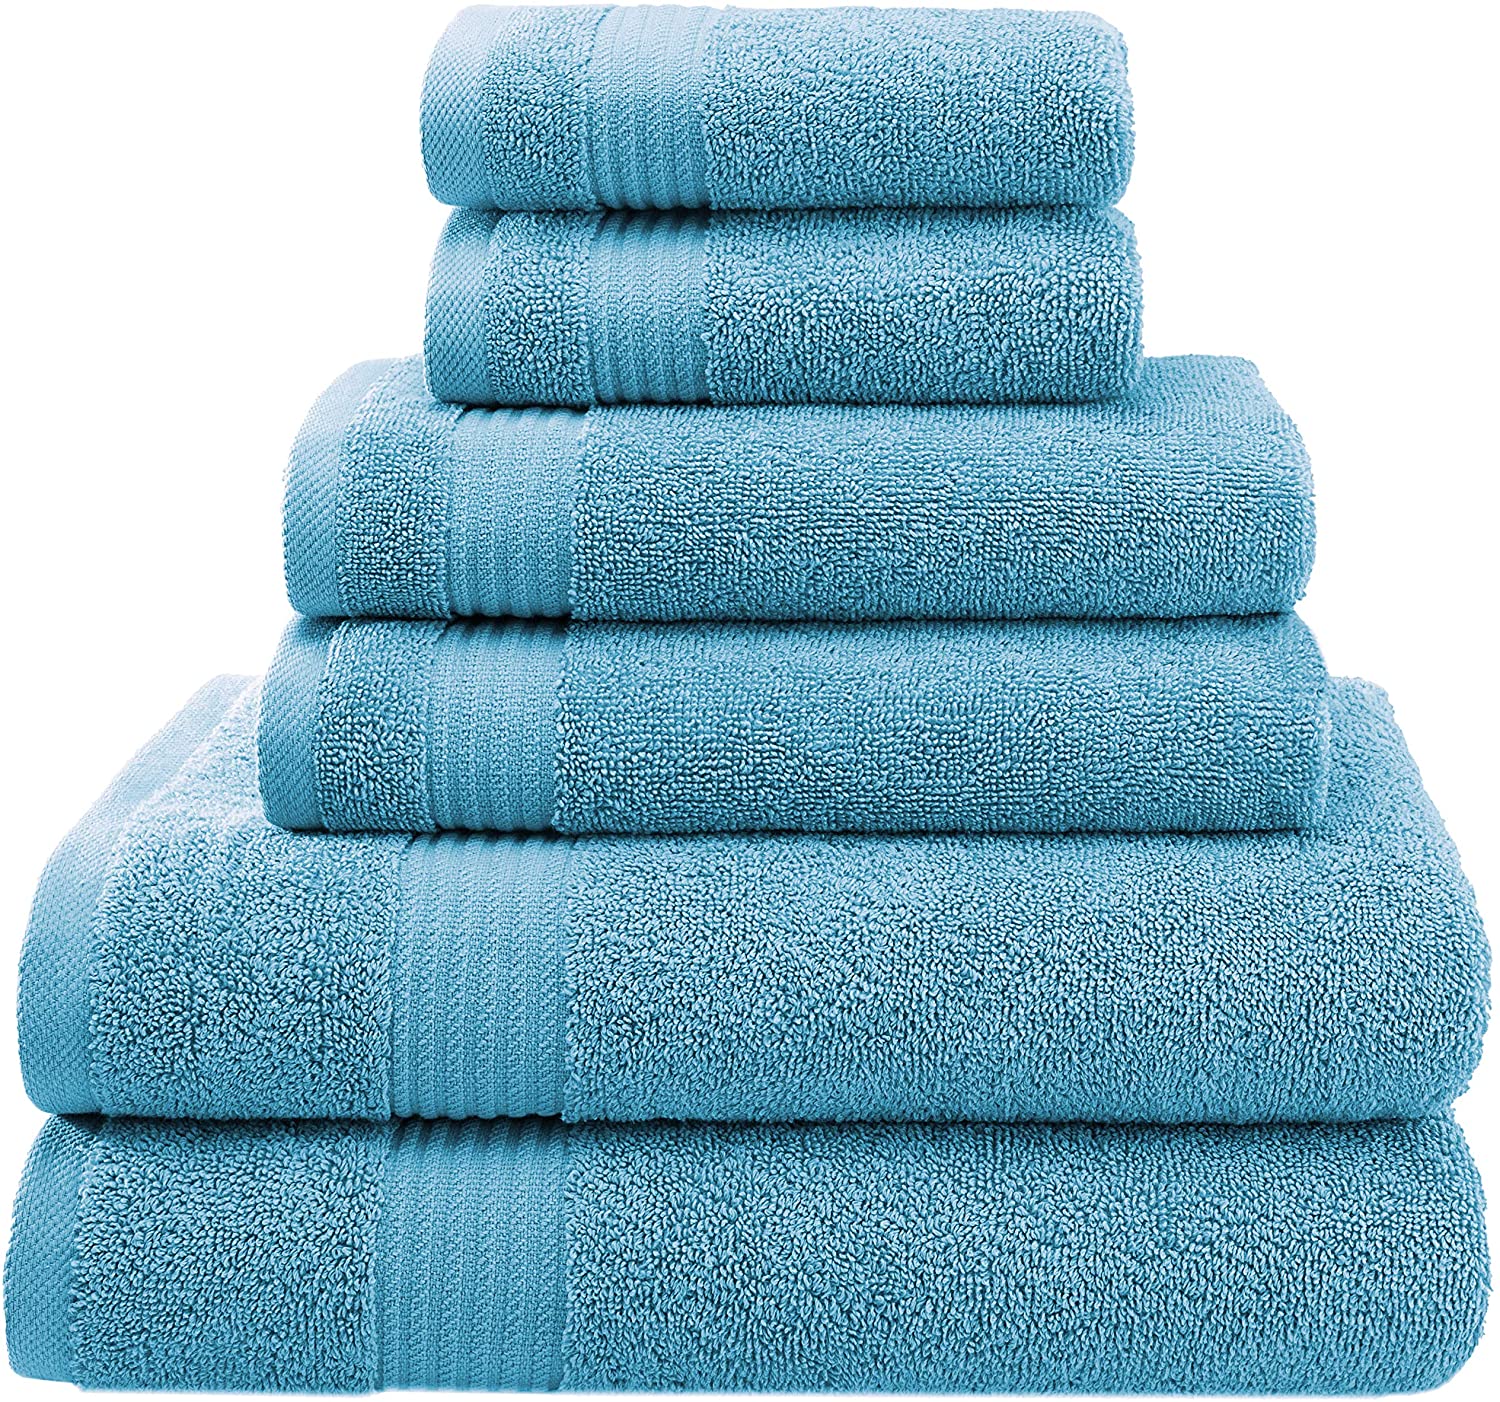 Cotton Details about   Hotel & Spa Quality Super Absorbent and Soft 6 Piece Turkish Towel Set 